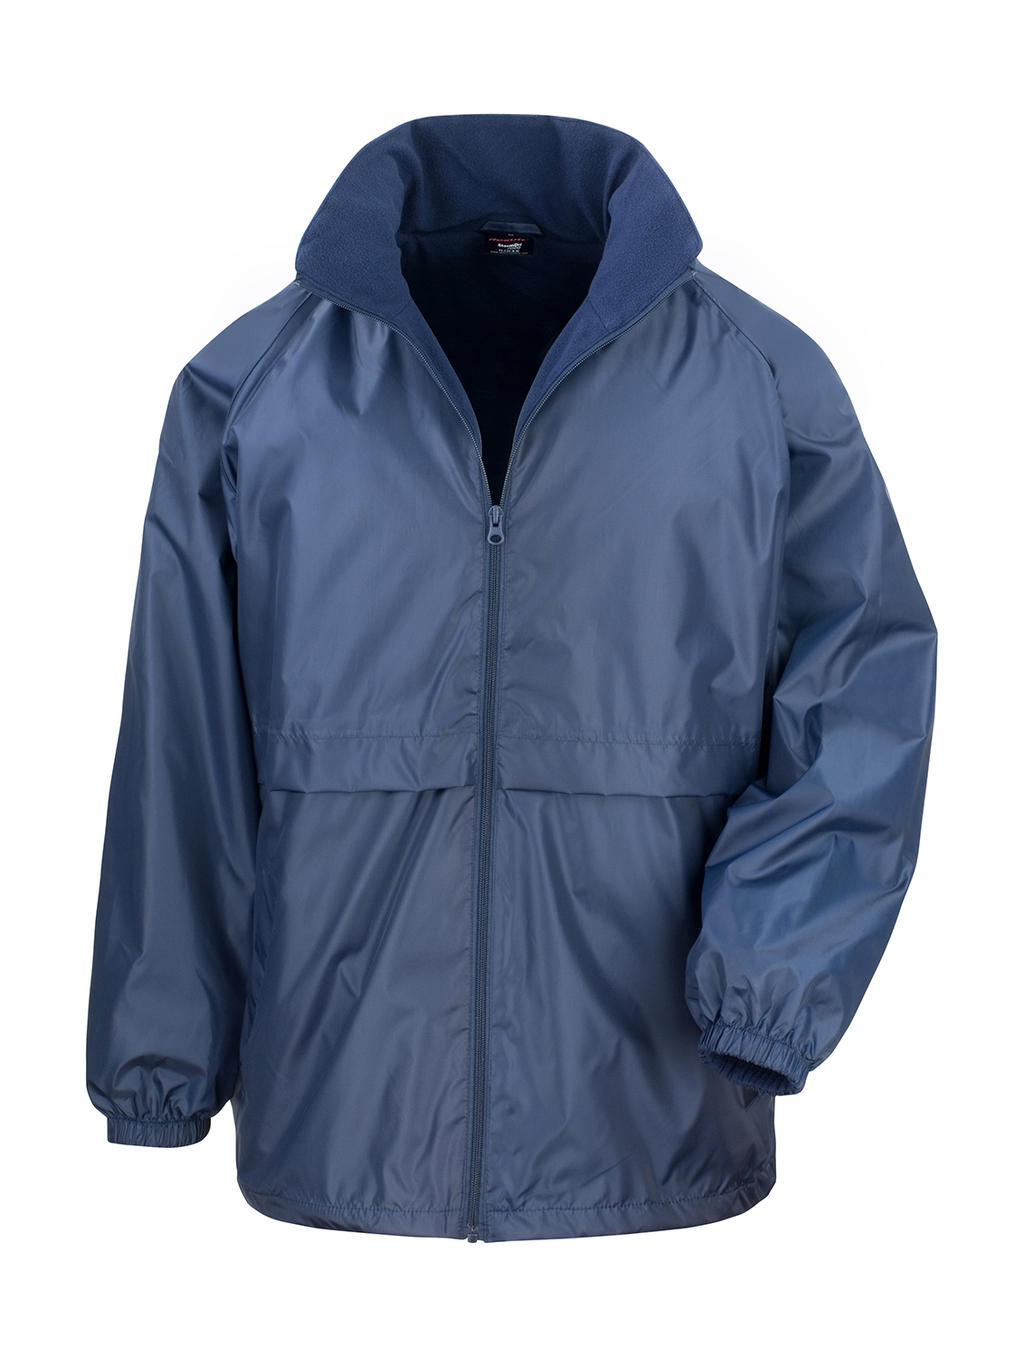  Microfleece Lined Jacket in Farbe Navy